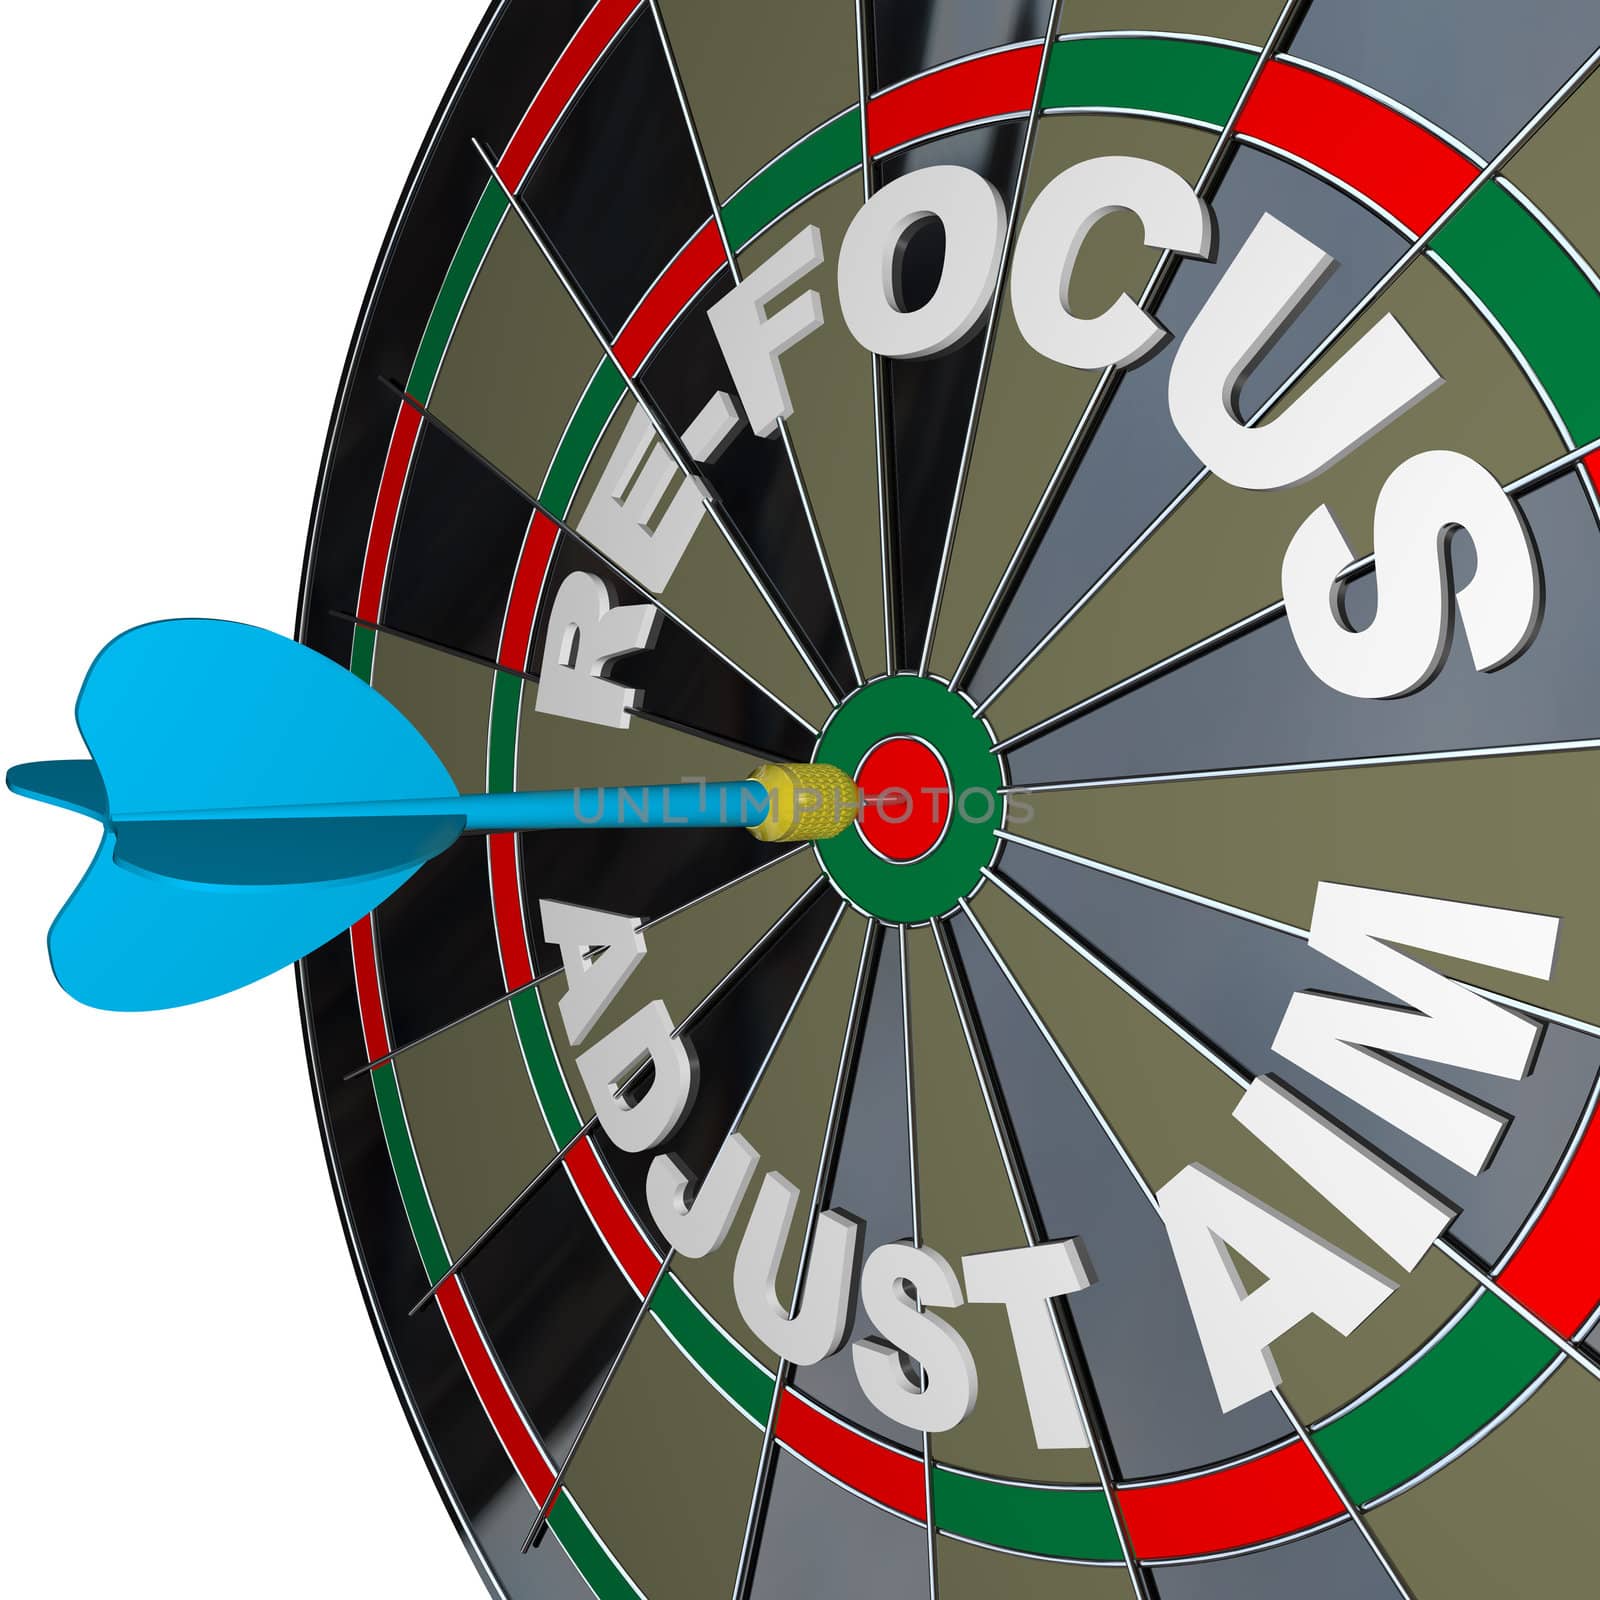 A dart hits a dartboard with the words Re-Focus and Adjust Aim to illustrate the need to change your approach to succeed in achieving a goal